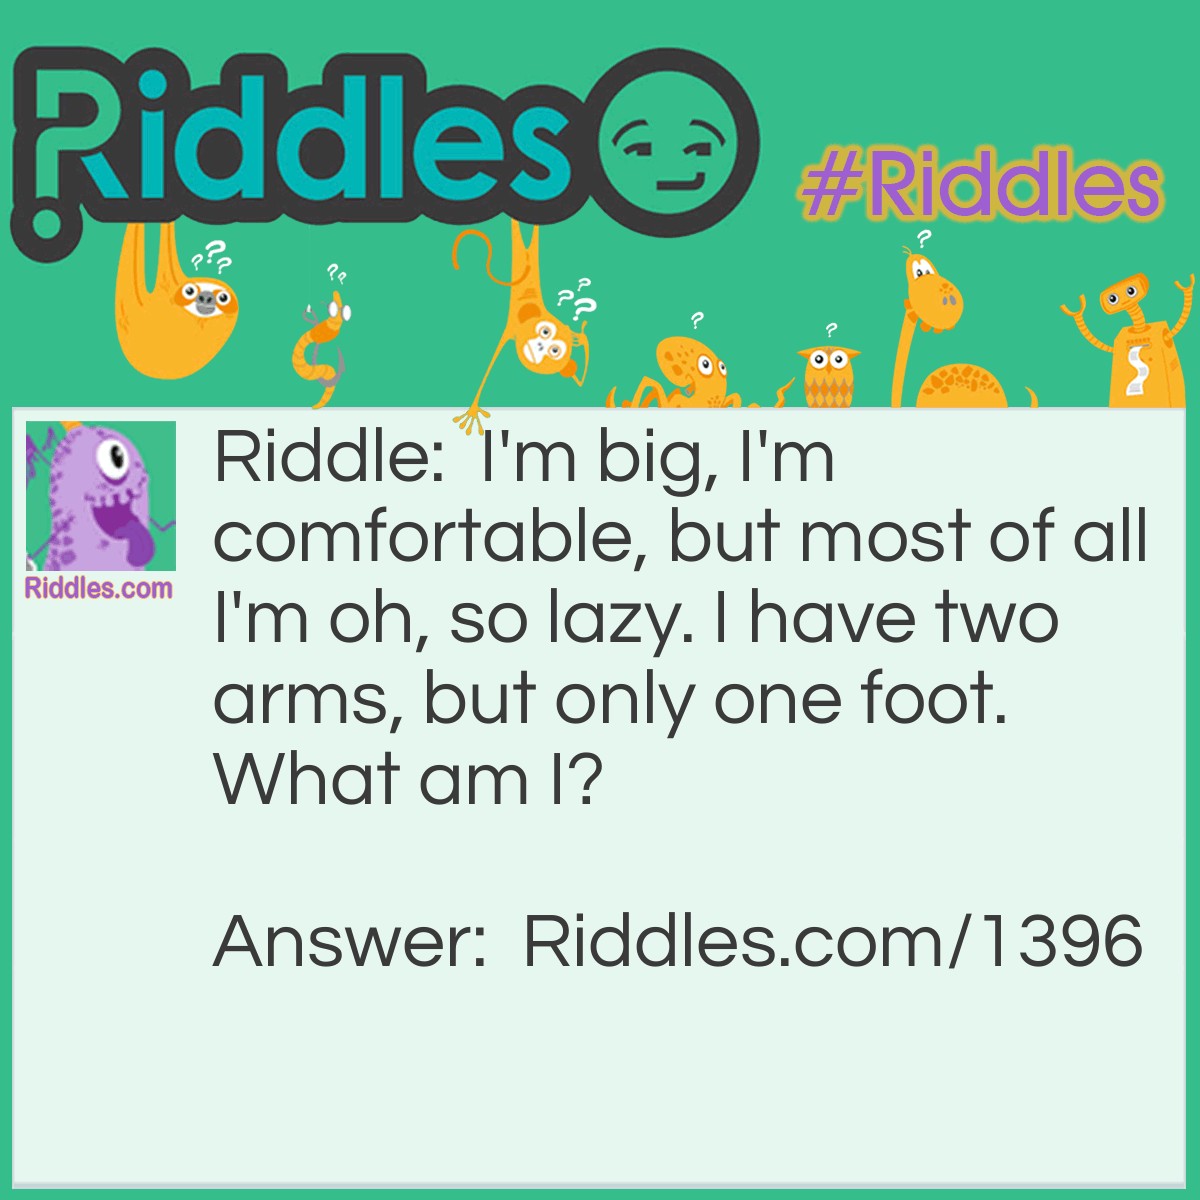 Riddle: I'm big, I'm comfortable, but most of all I'm oh, so lazy. I have two arms, but only one foot.
What am I? Answer: A lazy boy recliner.